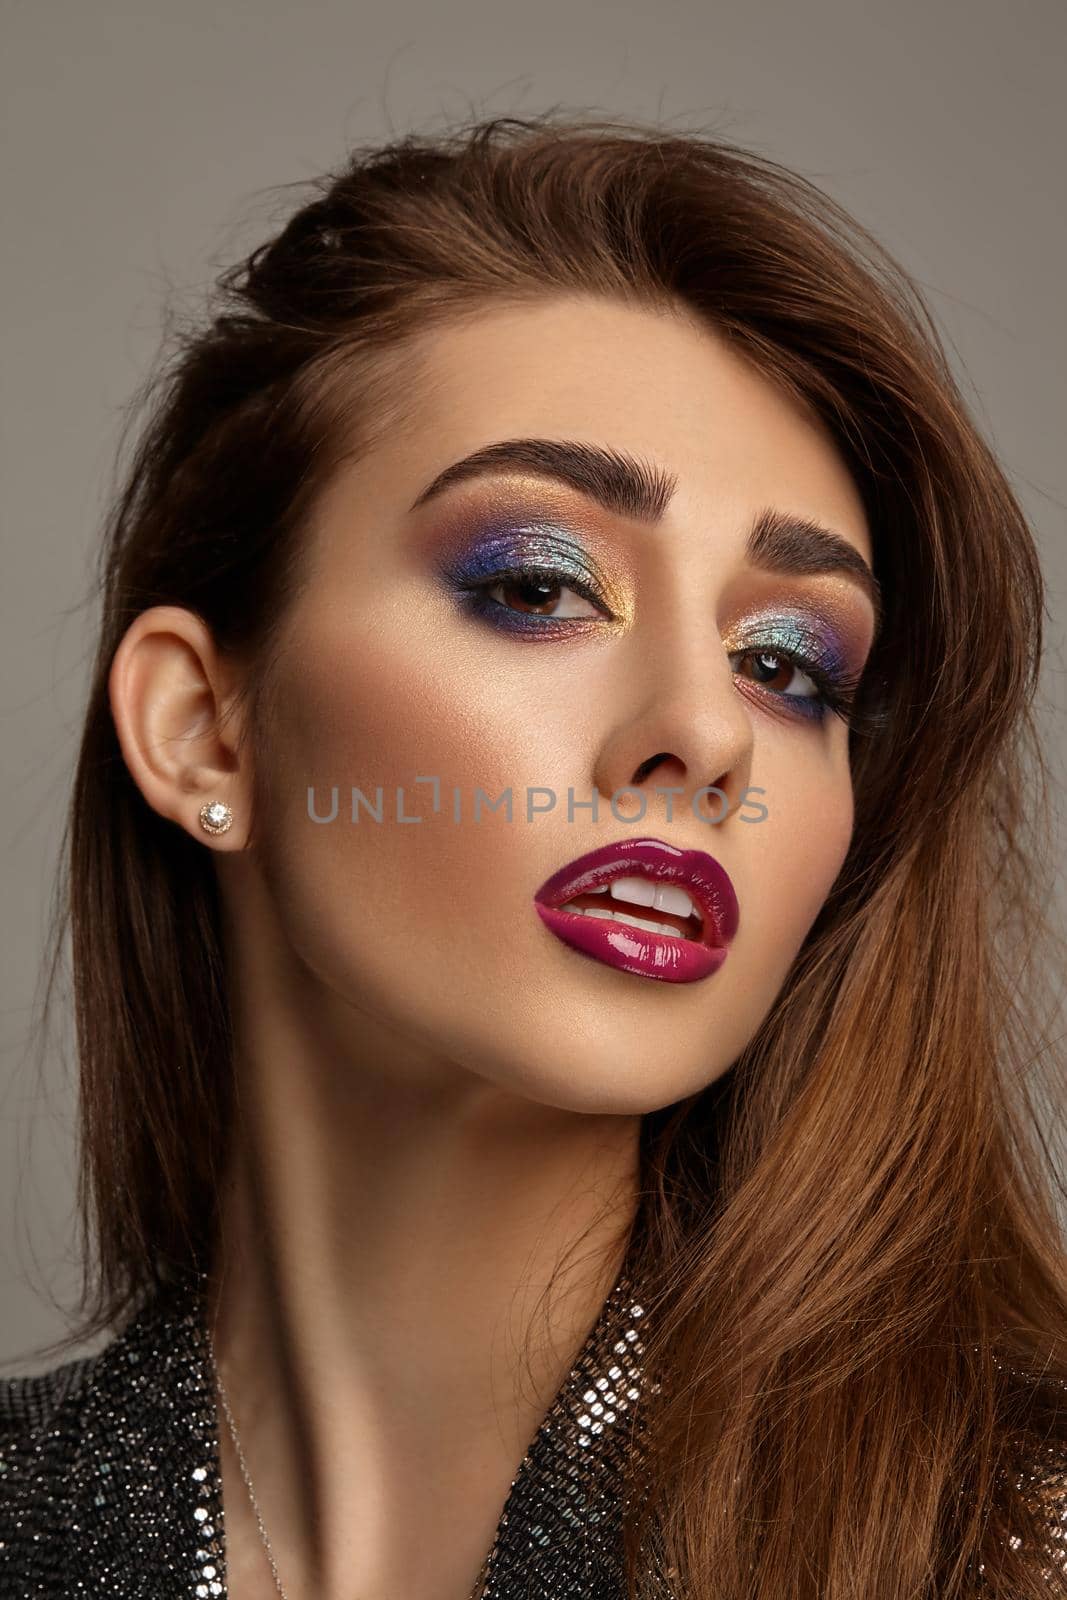 Brunette girl in black shiny dress and jewelry posing on gray background. Luxury makeup, perfect skin. Multi-colored eyeshadow, false eyelashes, glossy burgundy lips. Professional maquillage. Close up